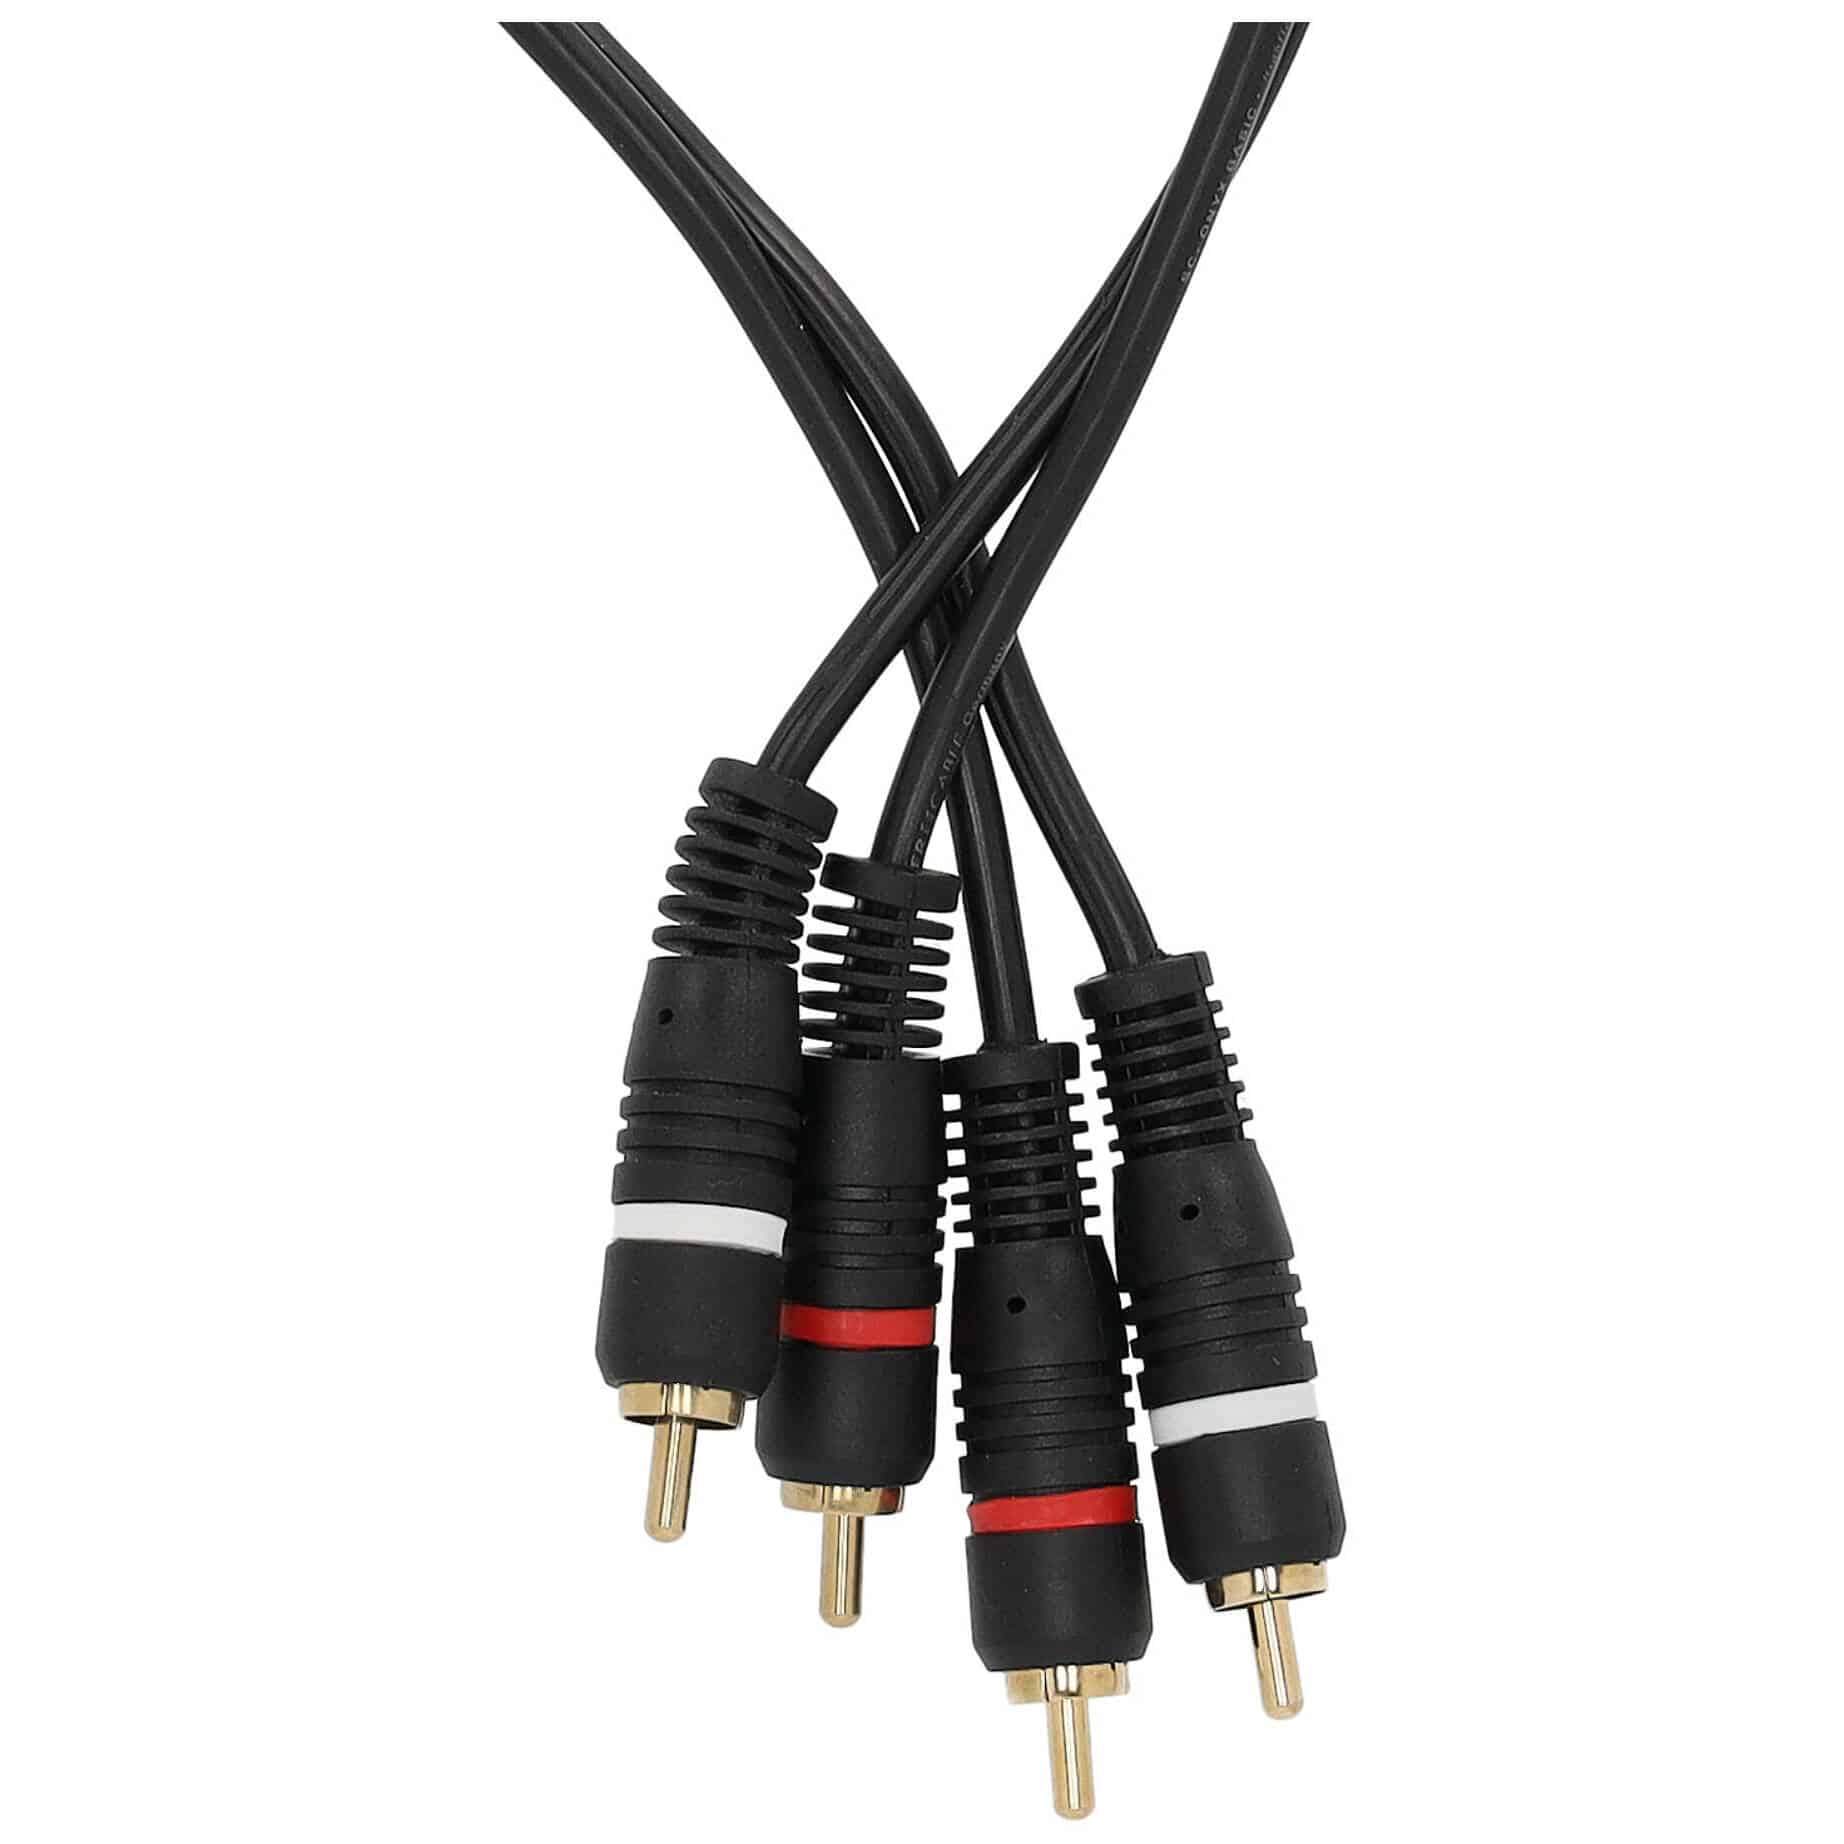 Sommer Cable BV-CICI-0300 SC-Onyx Basic 2 x Cinch Male - 2 x Cinch Male 3 Meter 2